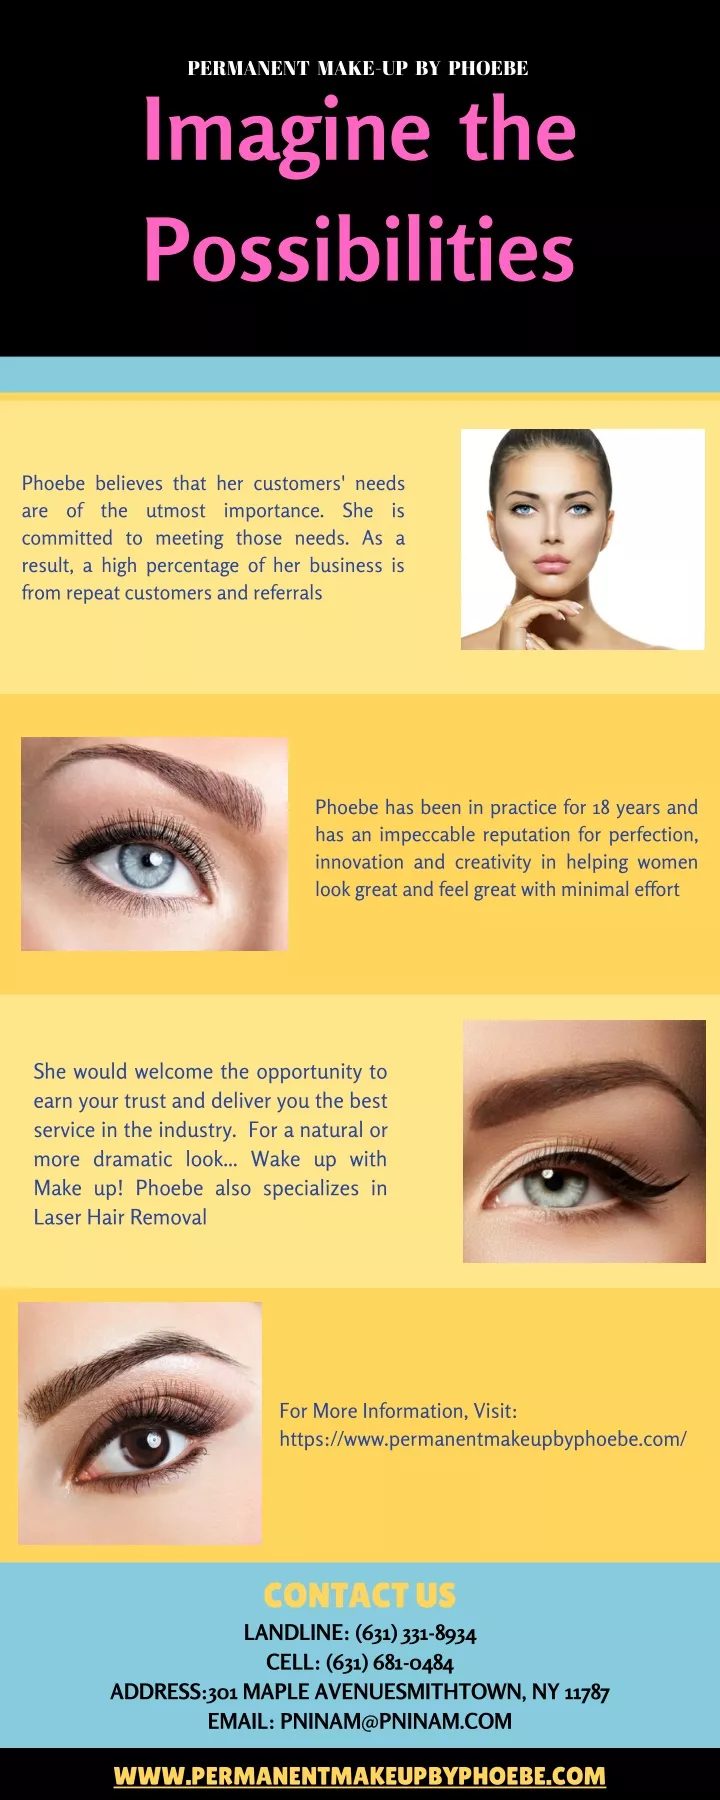 permanent make up by phoebe imagine